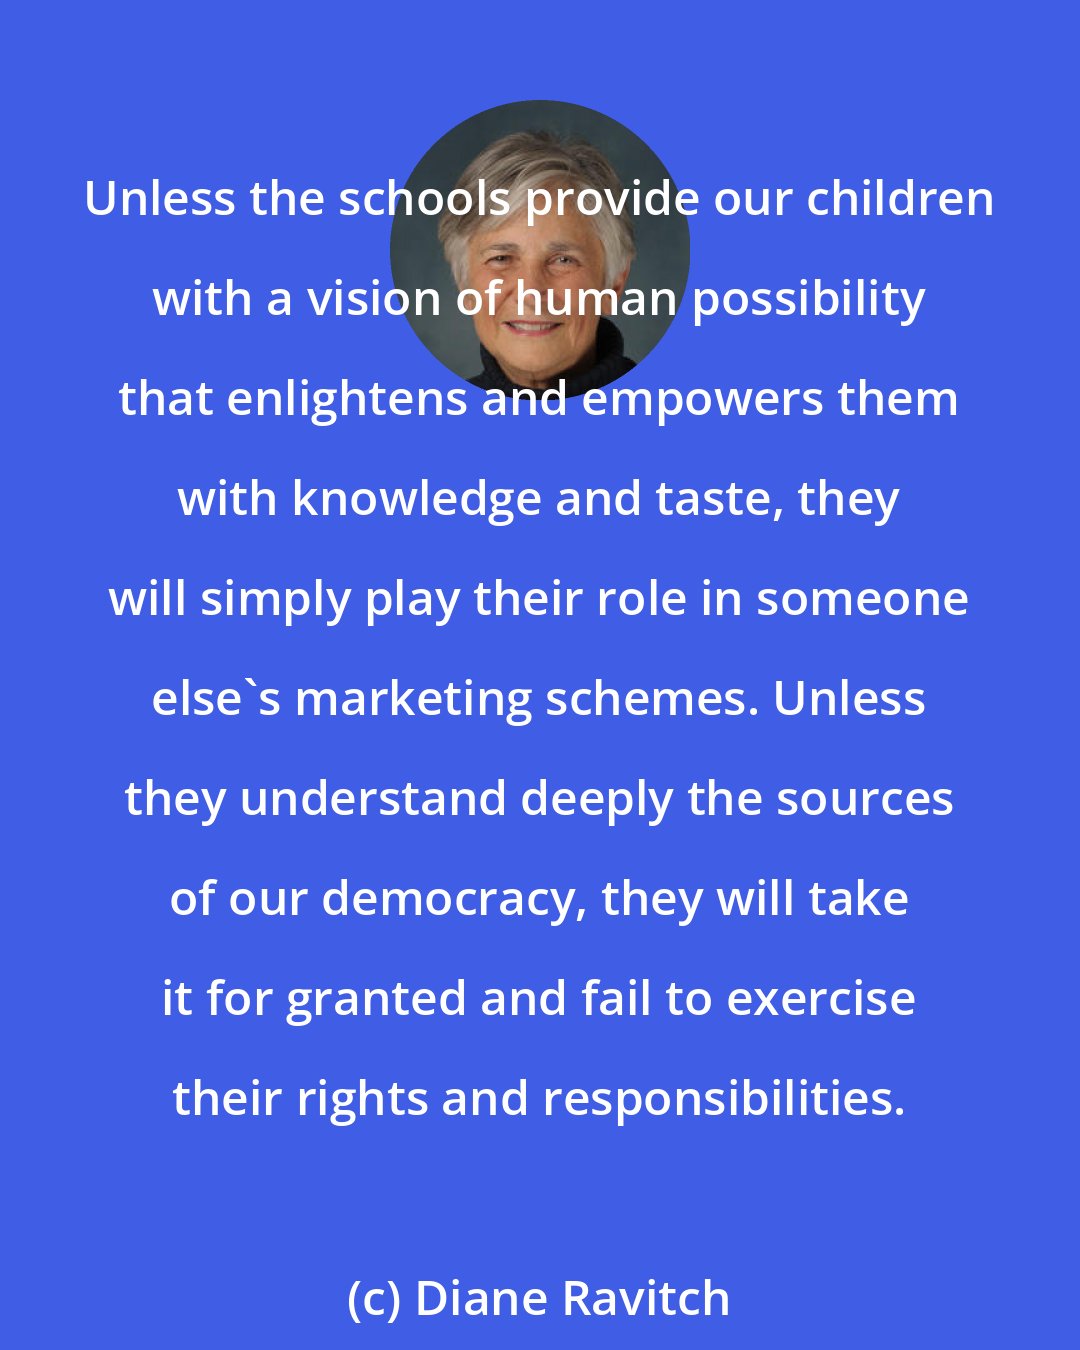 Diane Ravitch: Unless the schools provide our children with a vision of human possibility that enlightens and empowers them with knowledge and taste, they will simply play their role in someone else's marketing schemes. Unless they understand deeply the sources of our democracy, they will take it for granted and fail to exercise their rights and responsibilities.